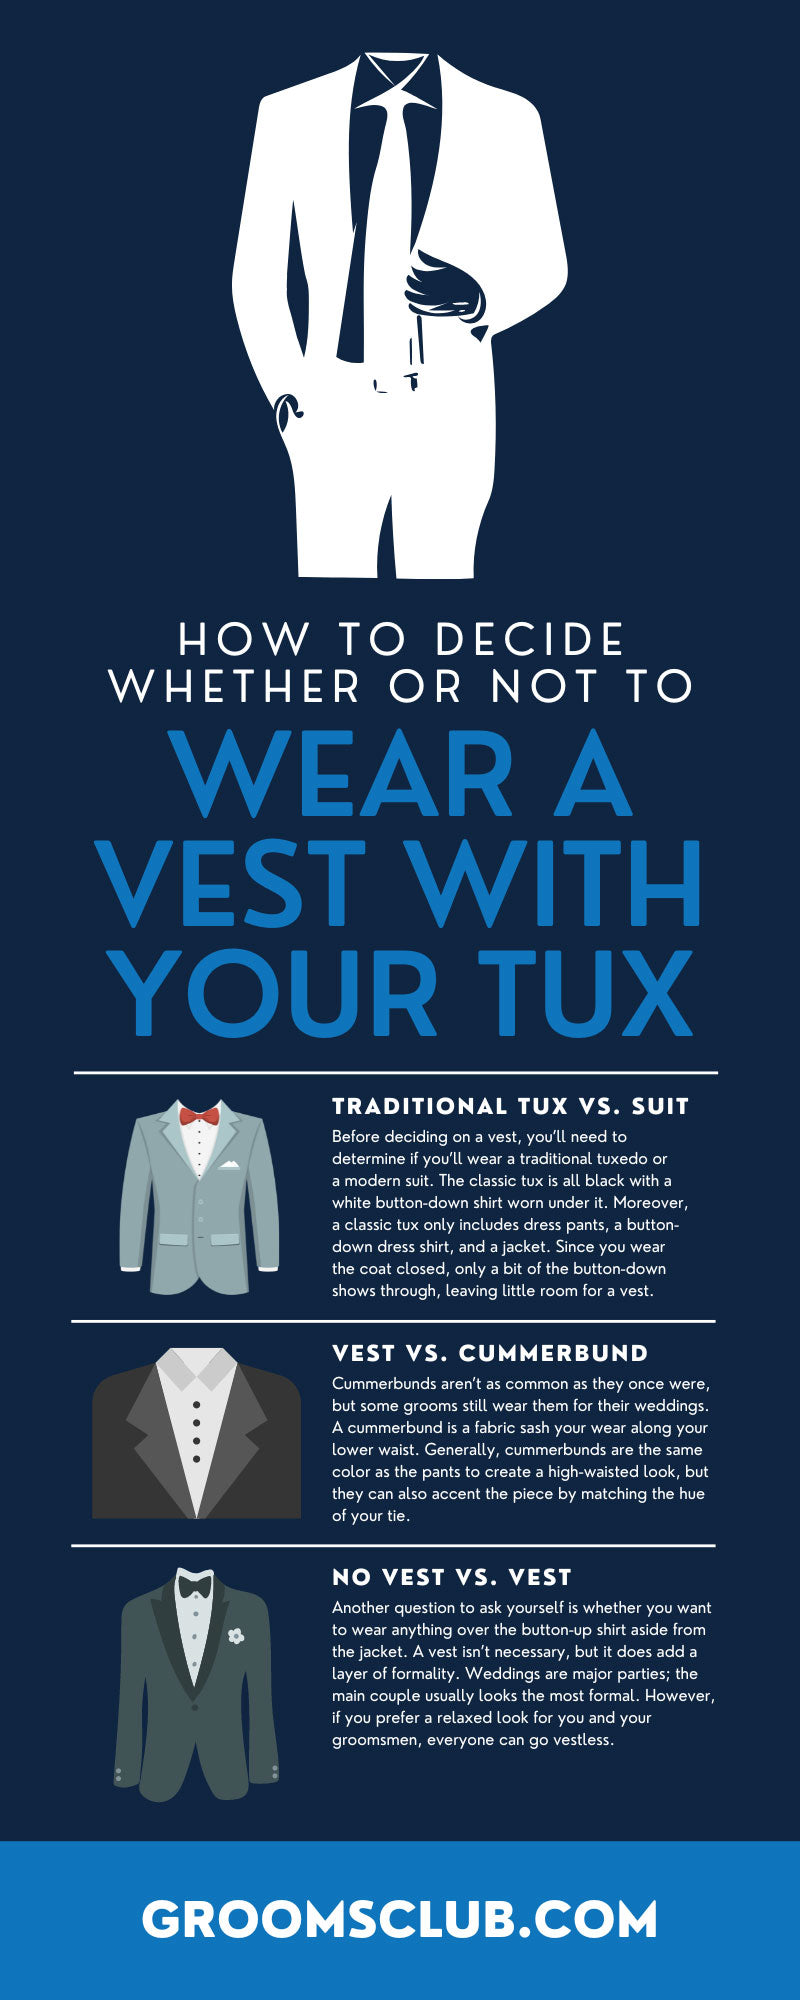 How To Decide Whether or Not To Wear a Vest With Your Tux